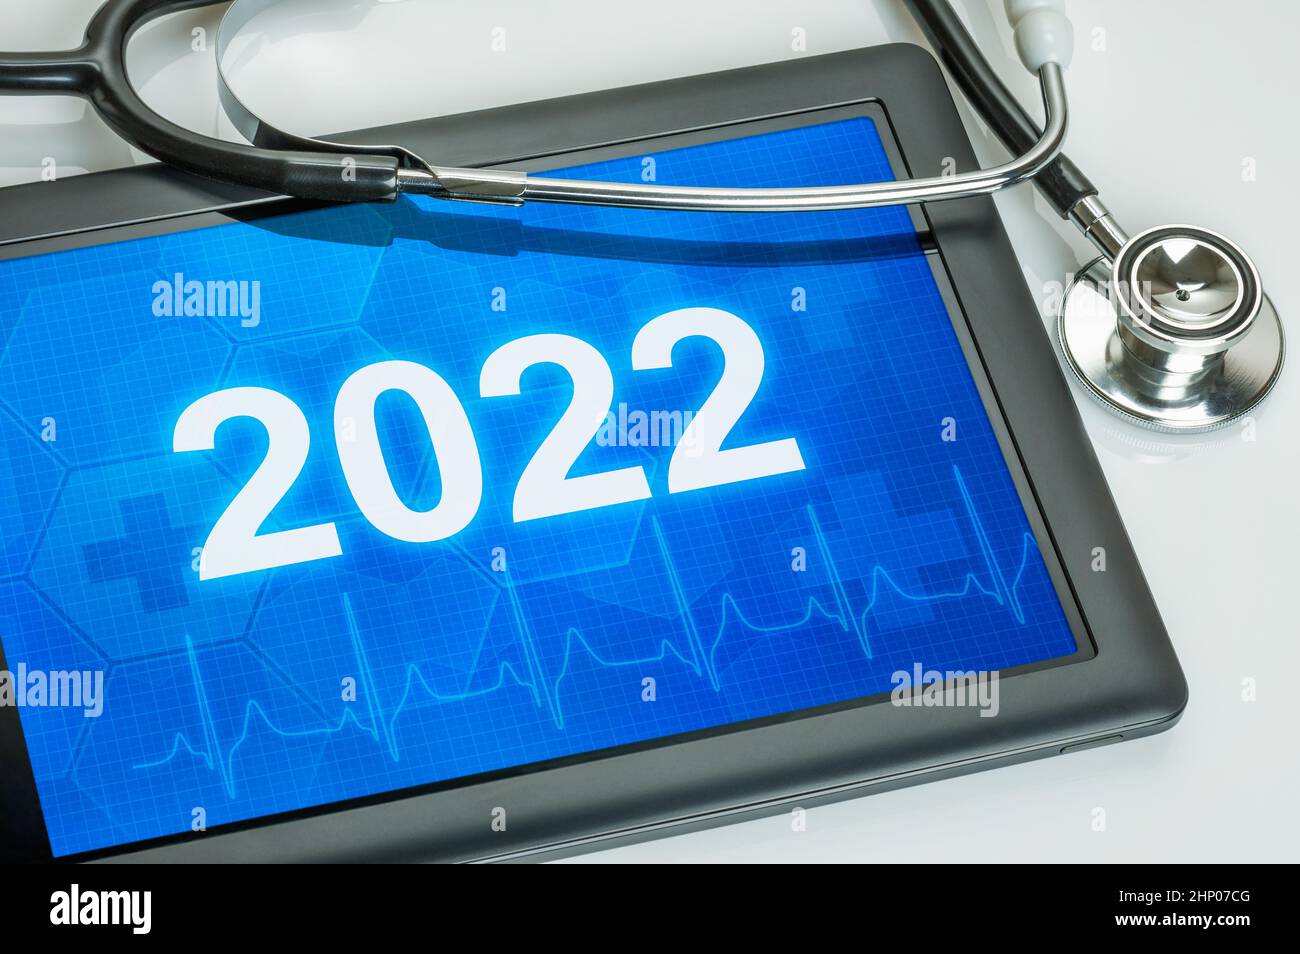 Tablet with the number 2022 on the display Stock Photo